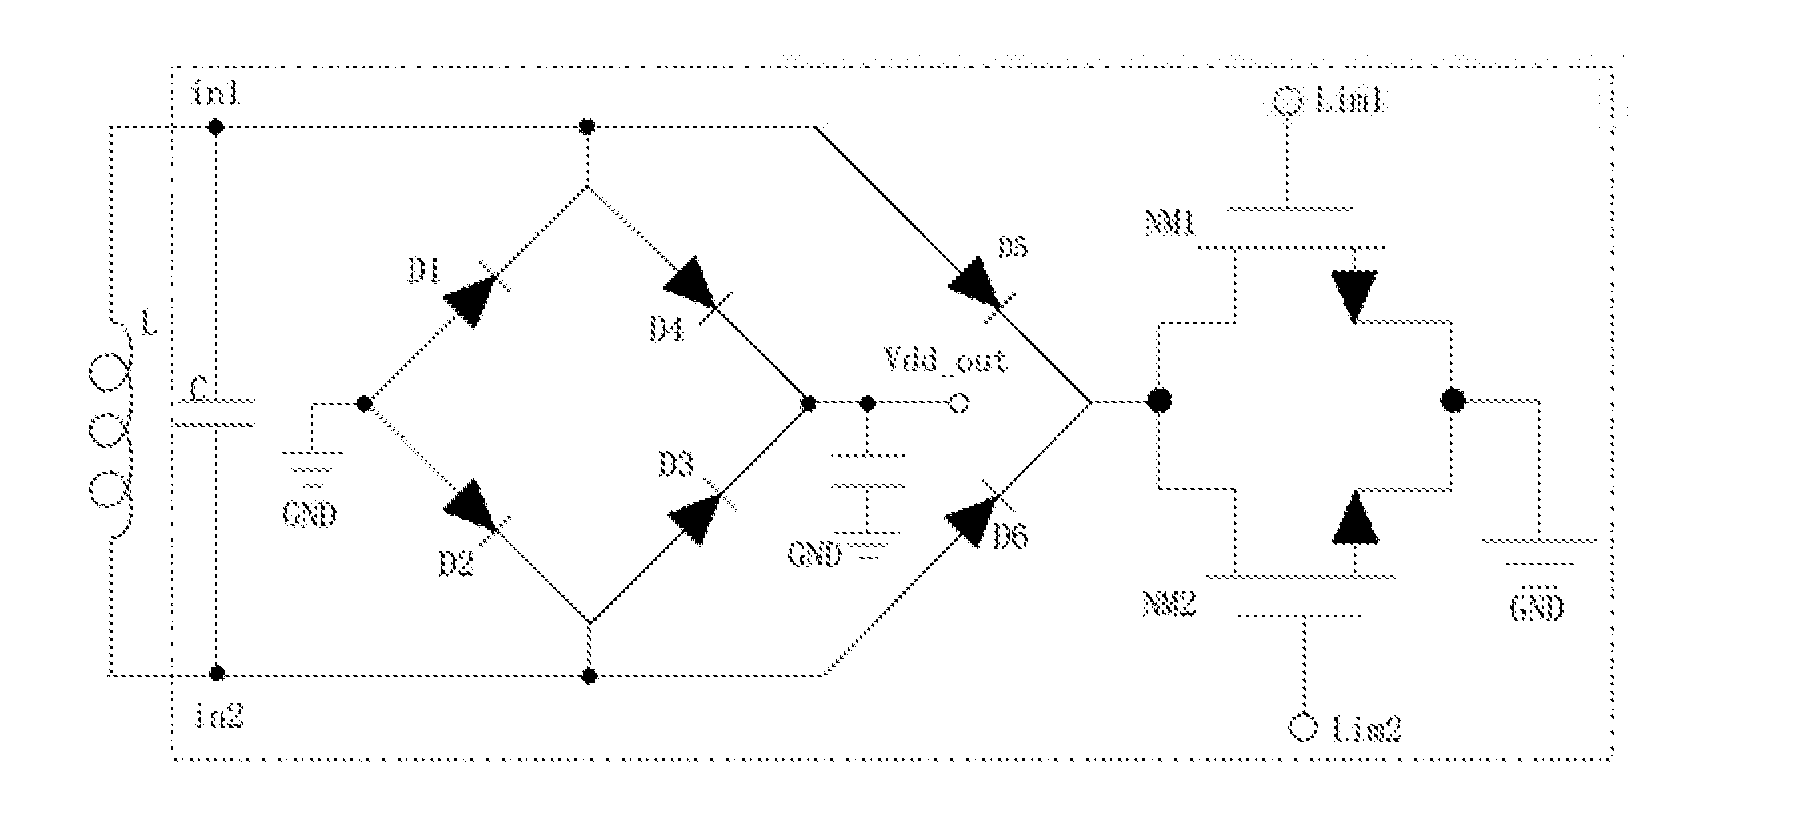 Rectifier and limiter circuit having a plurality of time constants and passive radio frequency tag